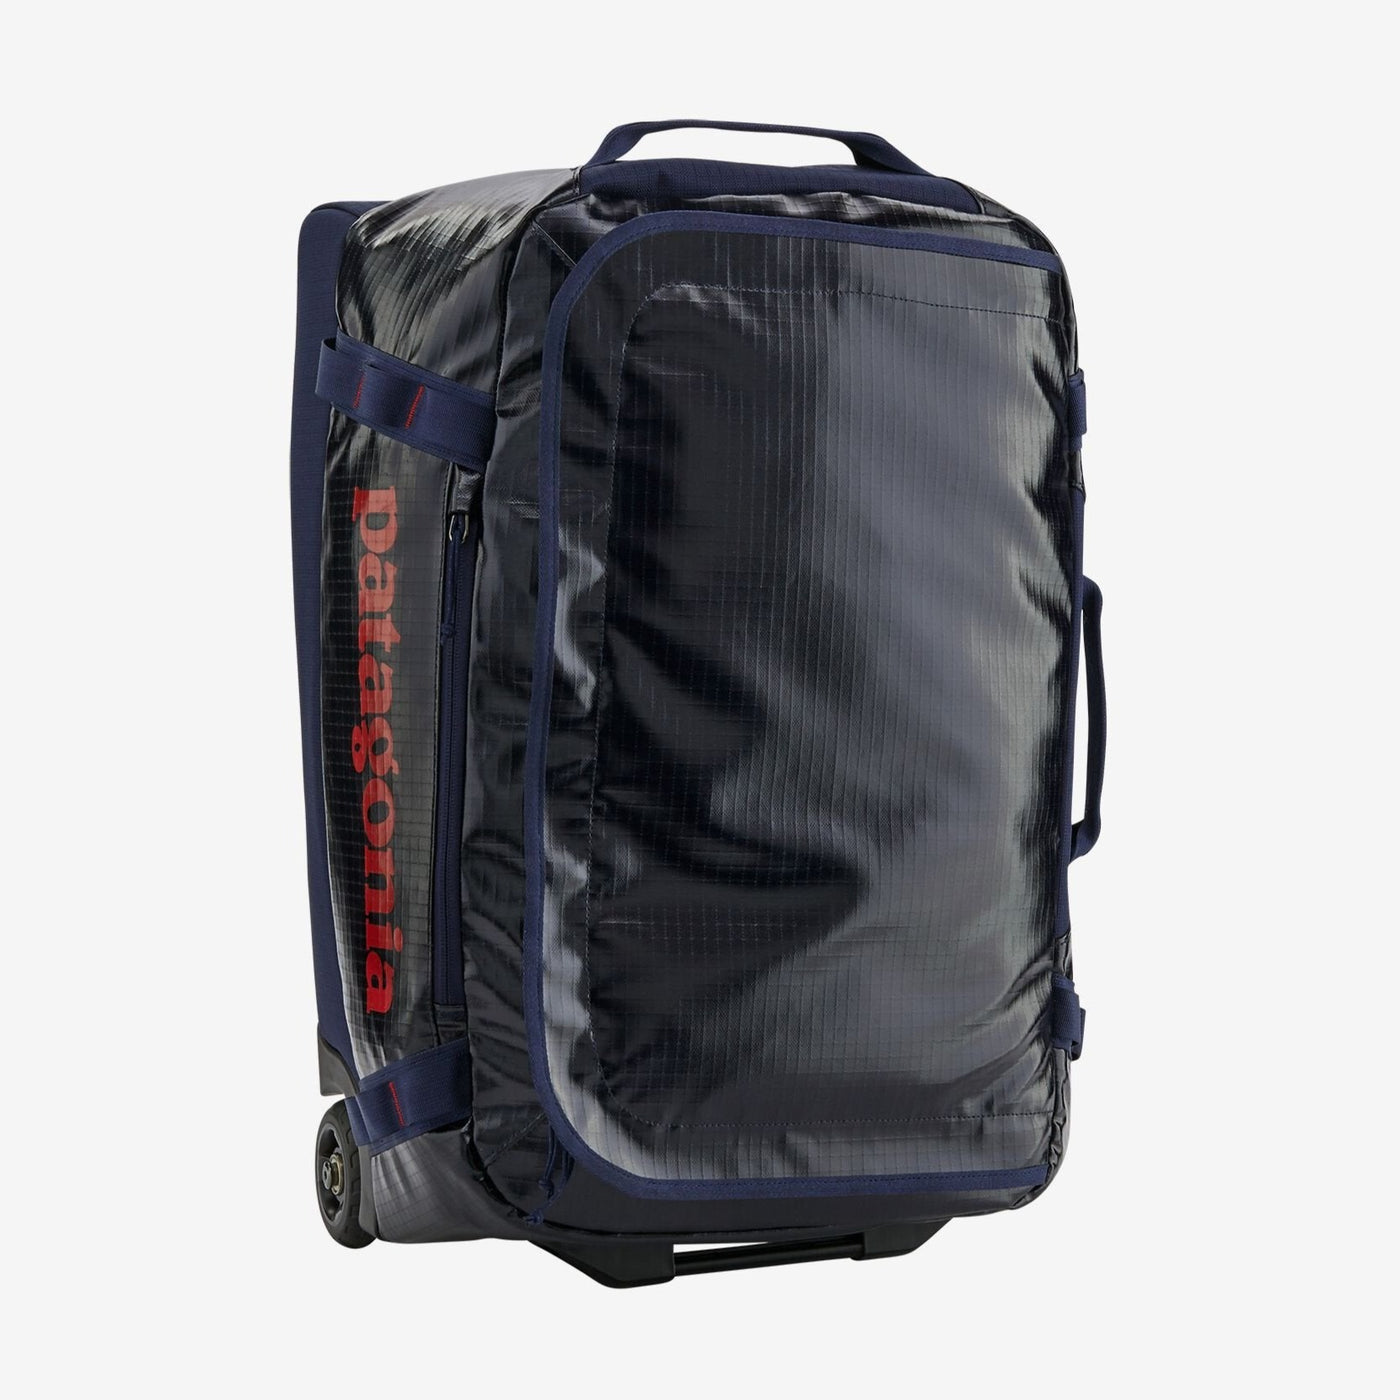 Patagonia Black Hole Wheeled Duffel Bag 40L-LUGGAGE-Classic Navy-Kevin's Fine Outdoor Gear & Apparel